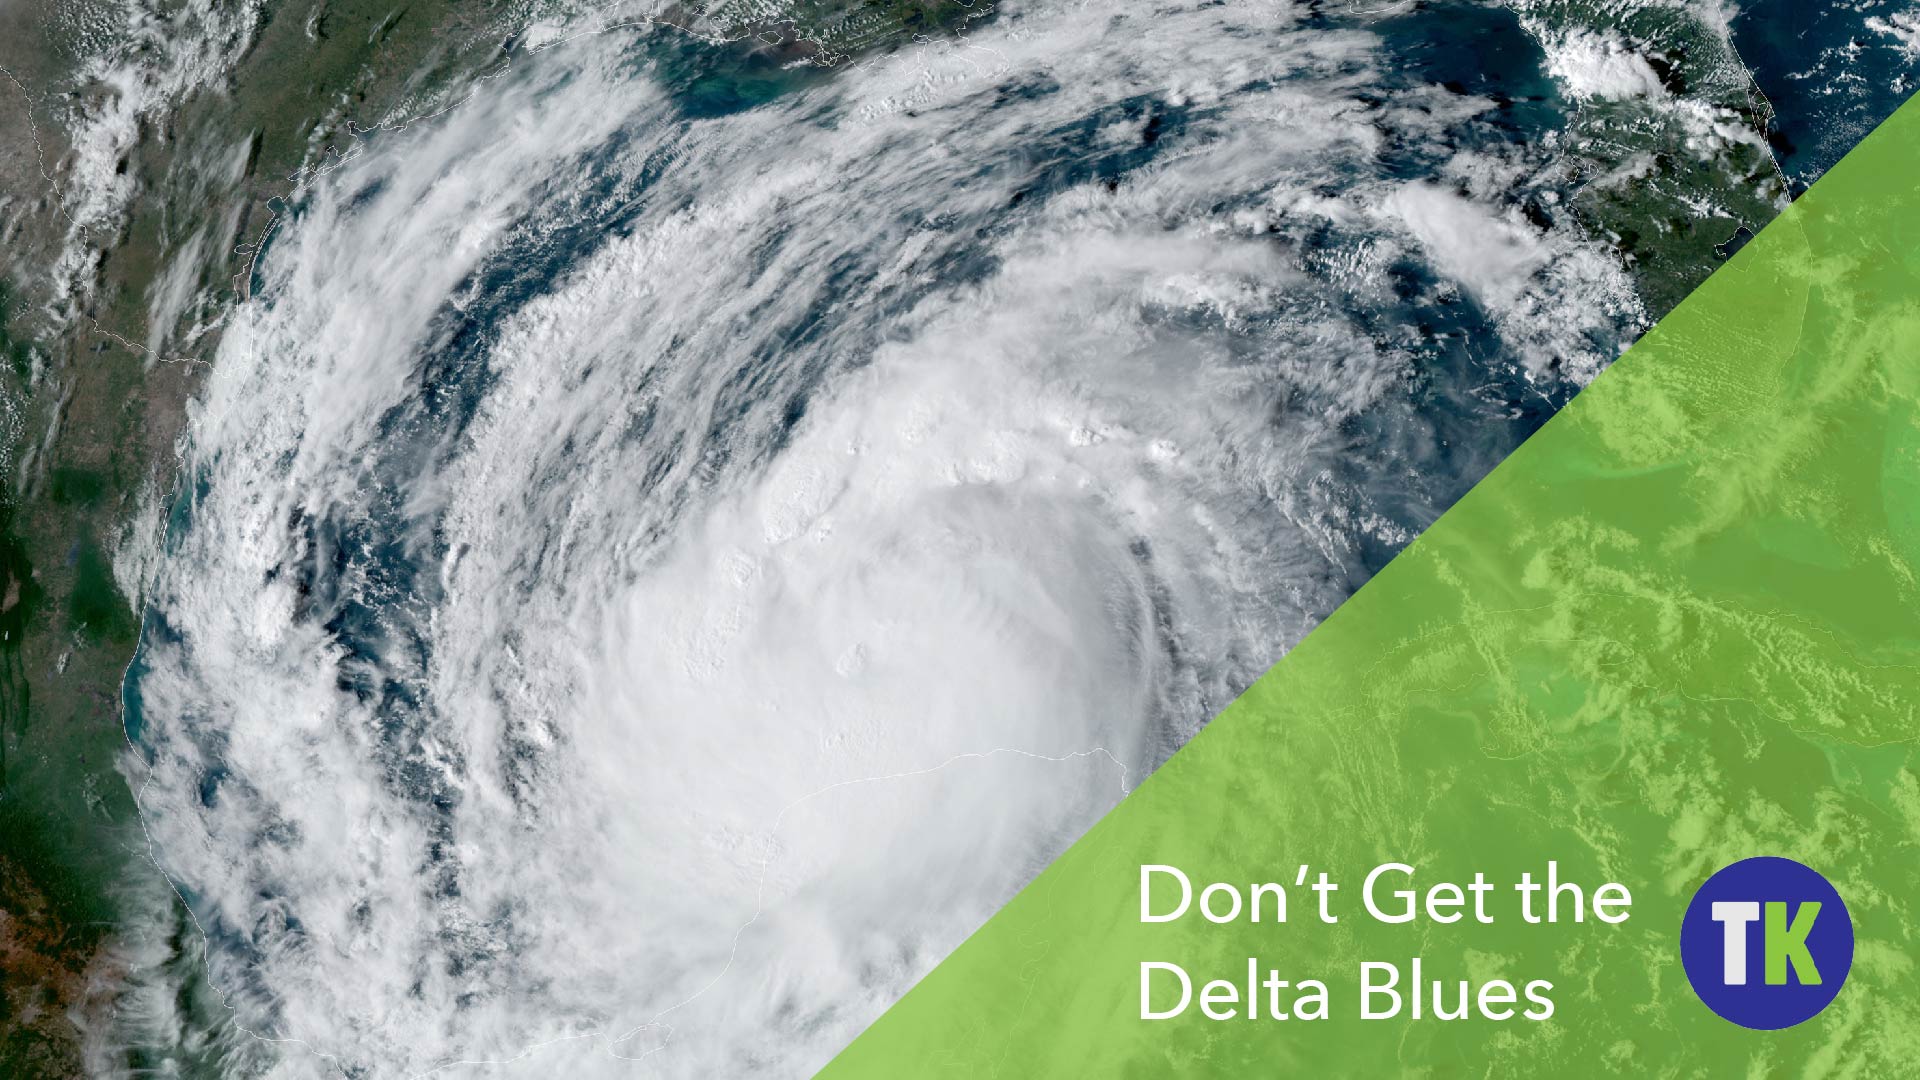 Don't get the Delta blues!